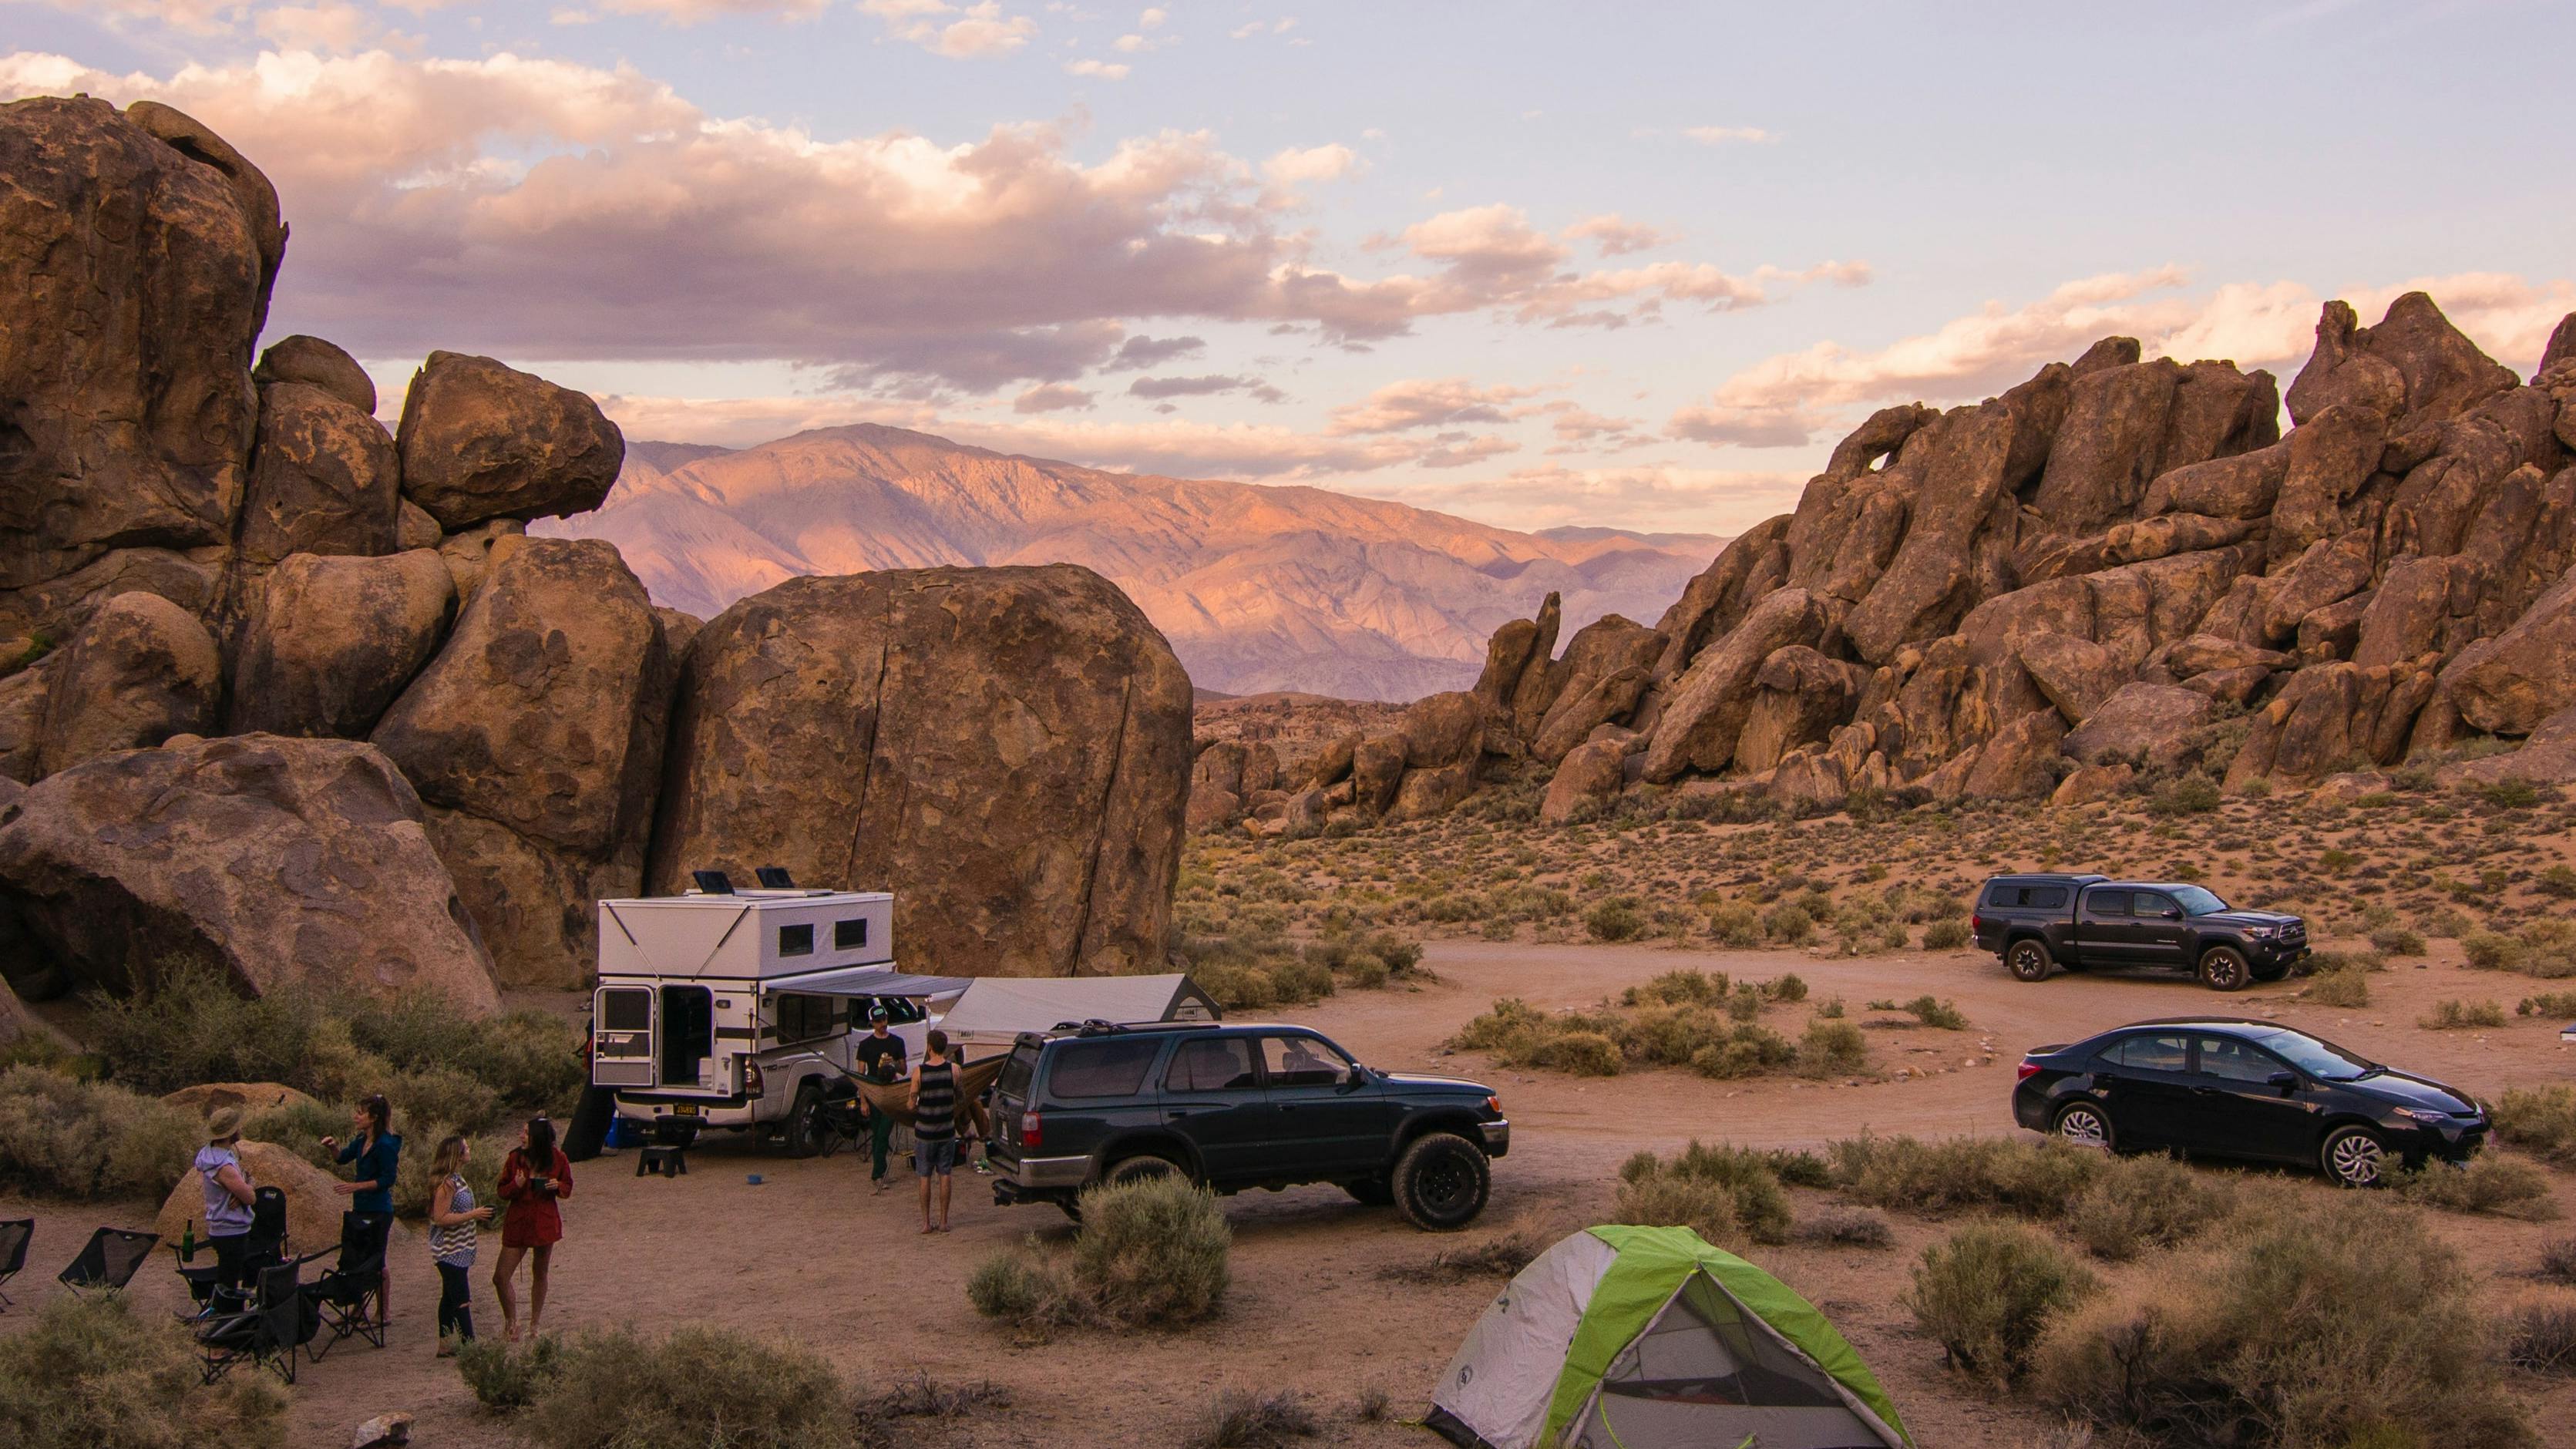 A campground with trucks, a camper, and tents in massive desert rock formations. The sky is pink and purple in the setting sun.